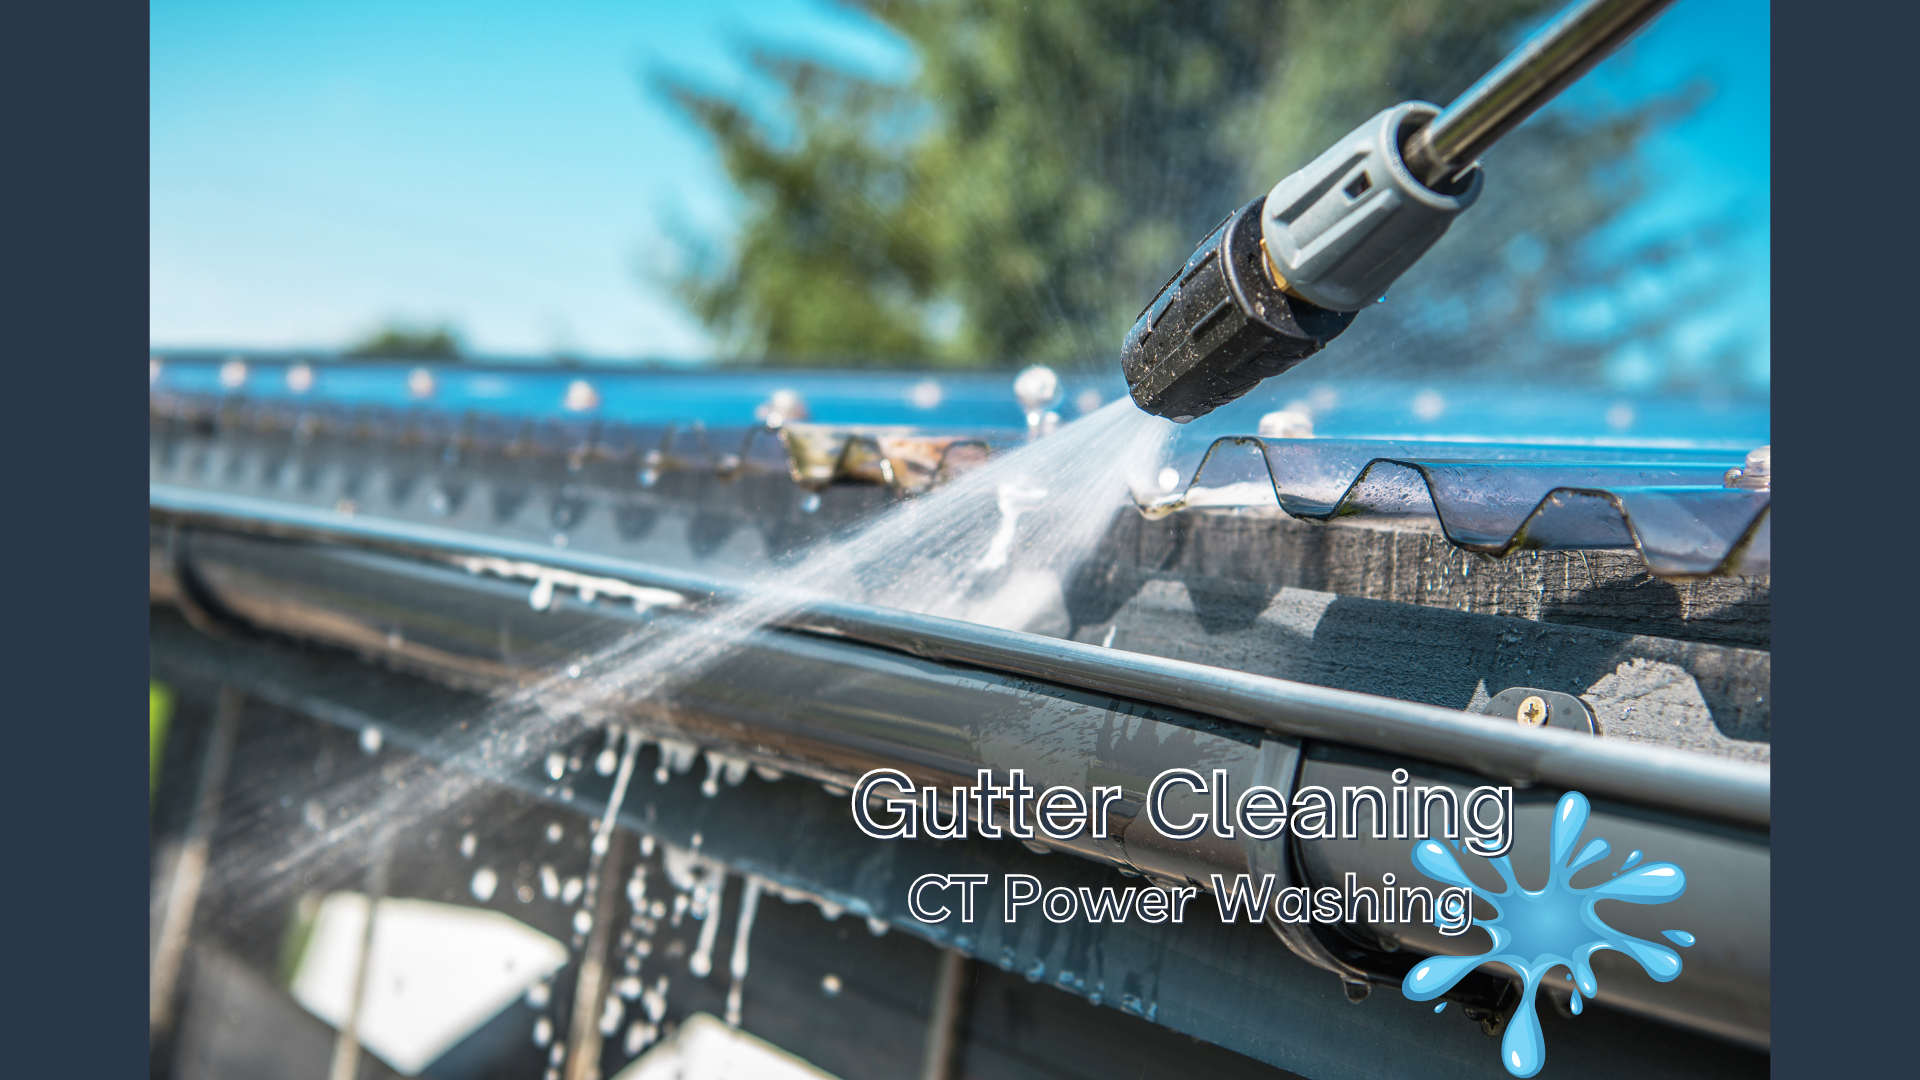 Gutter Cleaning Service Connecticut